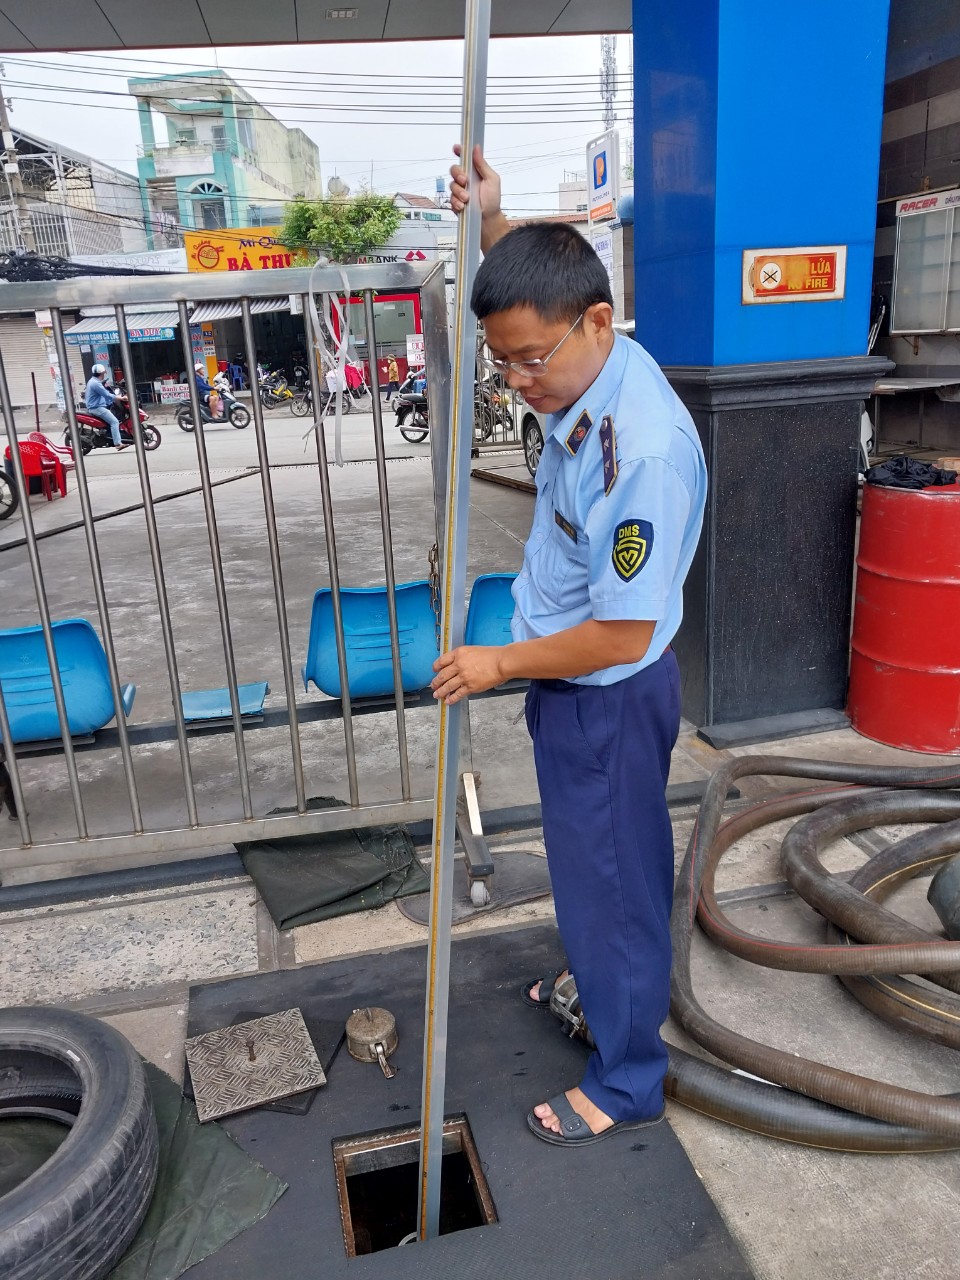 An official of the Ho Chi Minh City Market Surveillance Agency measures a gasoline tank at a filling station to check if the station is hoarding fuel. Photo: The Ho Chi Minh City Market Surveillance Agency